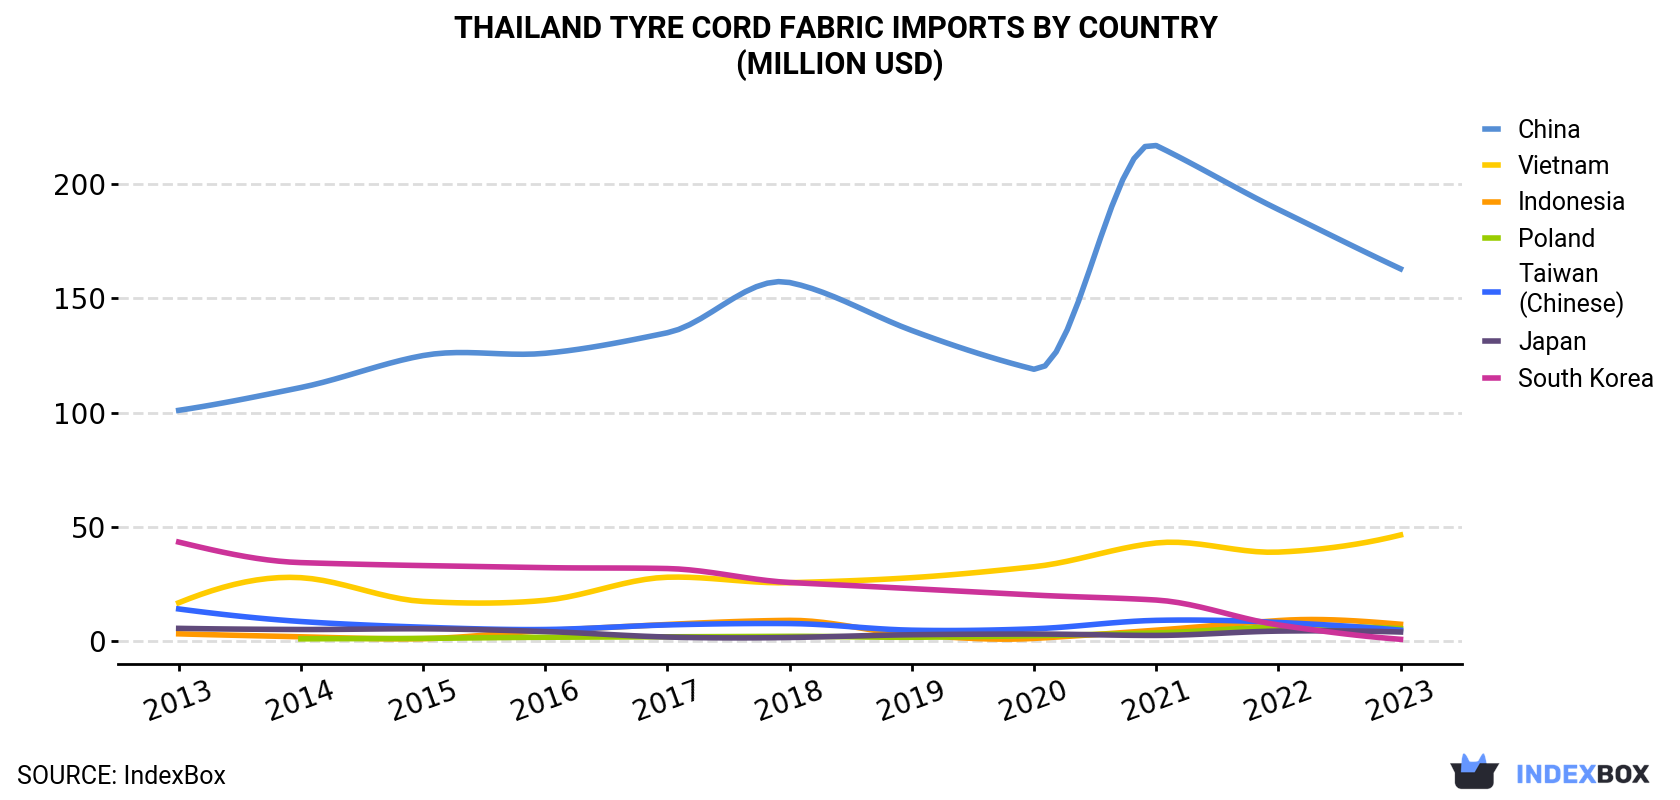 Thailand Tyre Cord Fabric Imports By Country (Million USD)